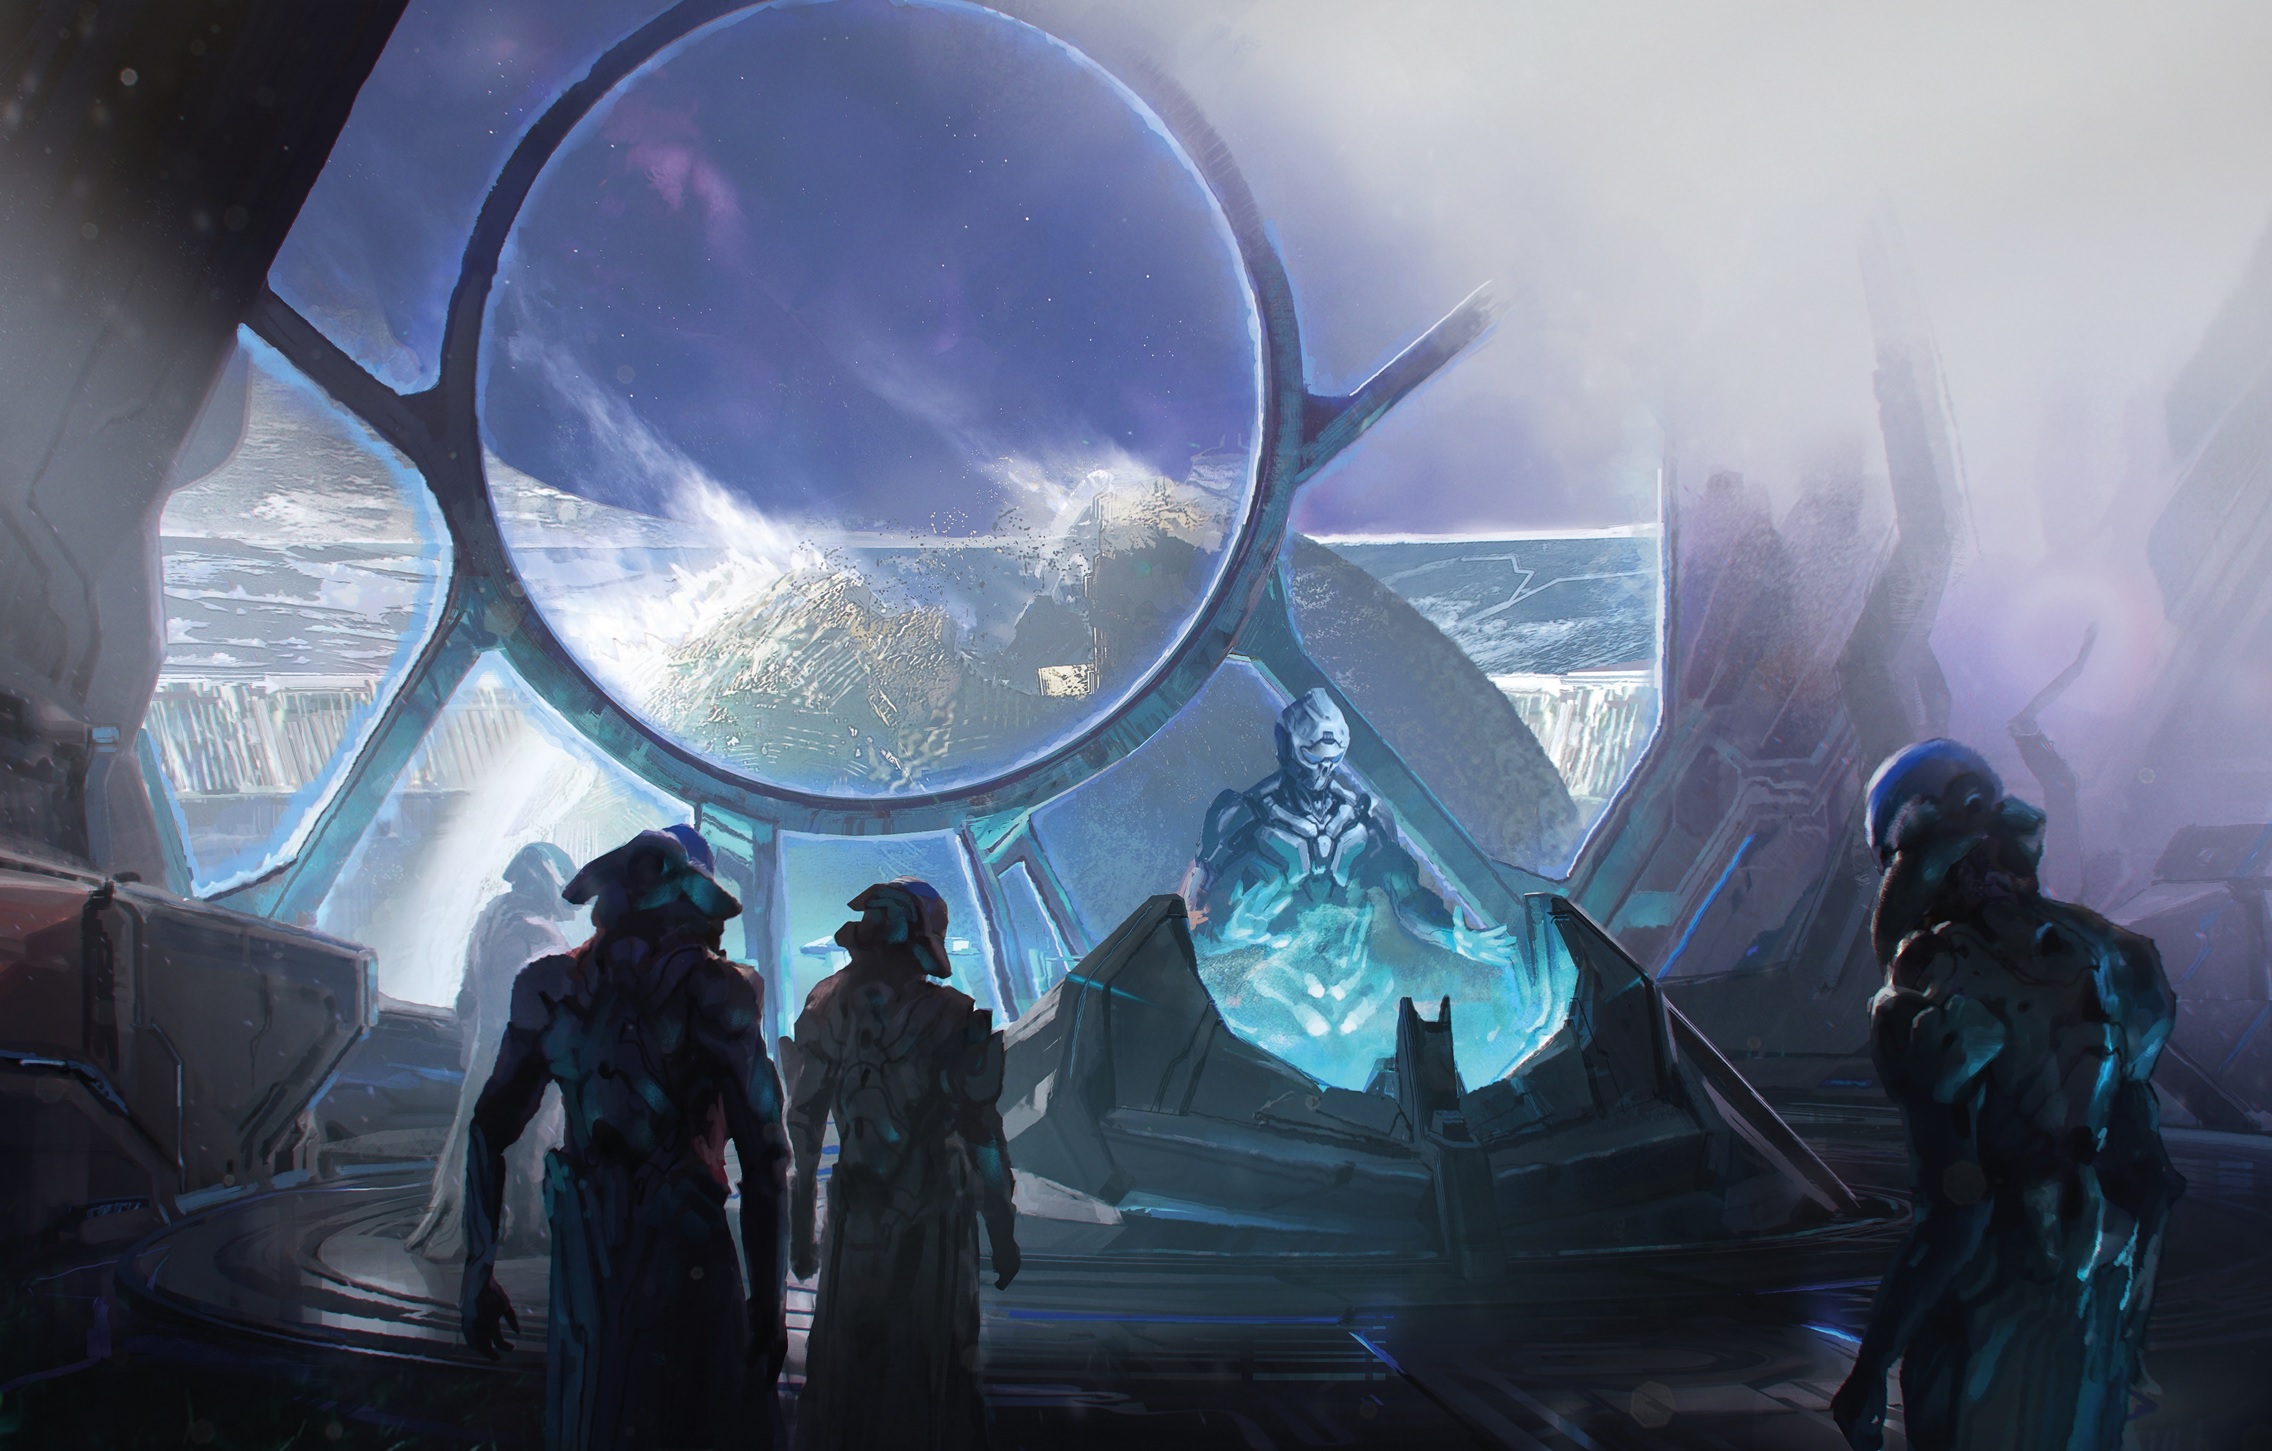 Halo Mythos artwork by Chase Toole depicting Bornstellar and a group of other Forerunners in the Ark's control room